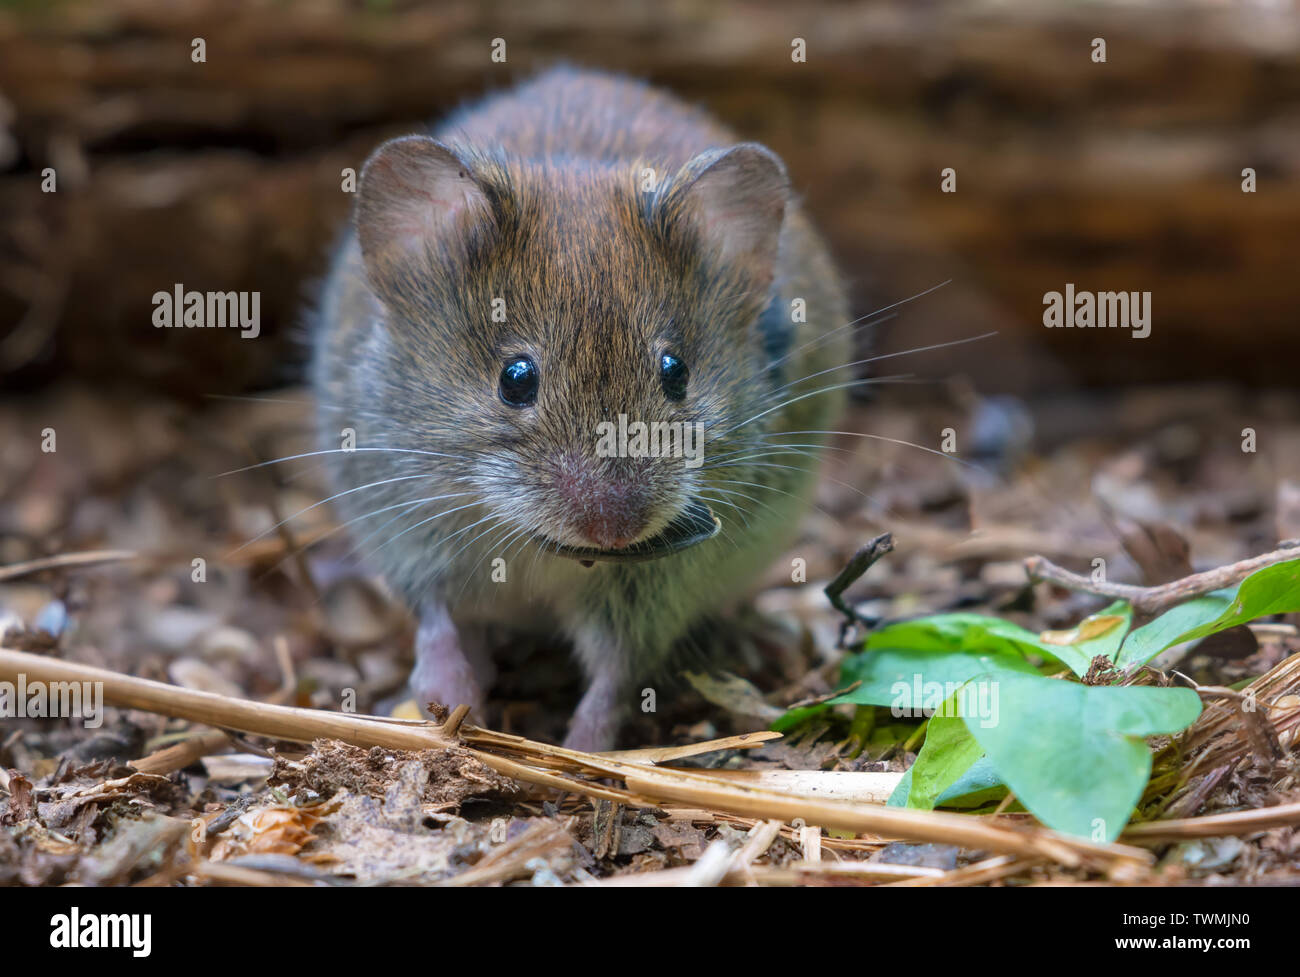 Bank vole with seed in mouth feeding on the ground in forest litter Stock Photo